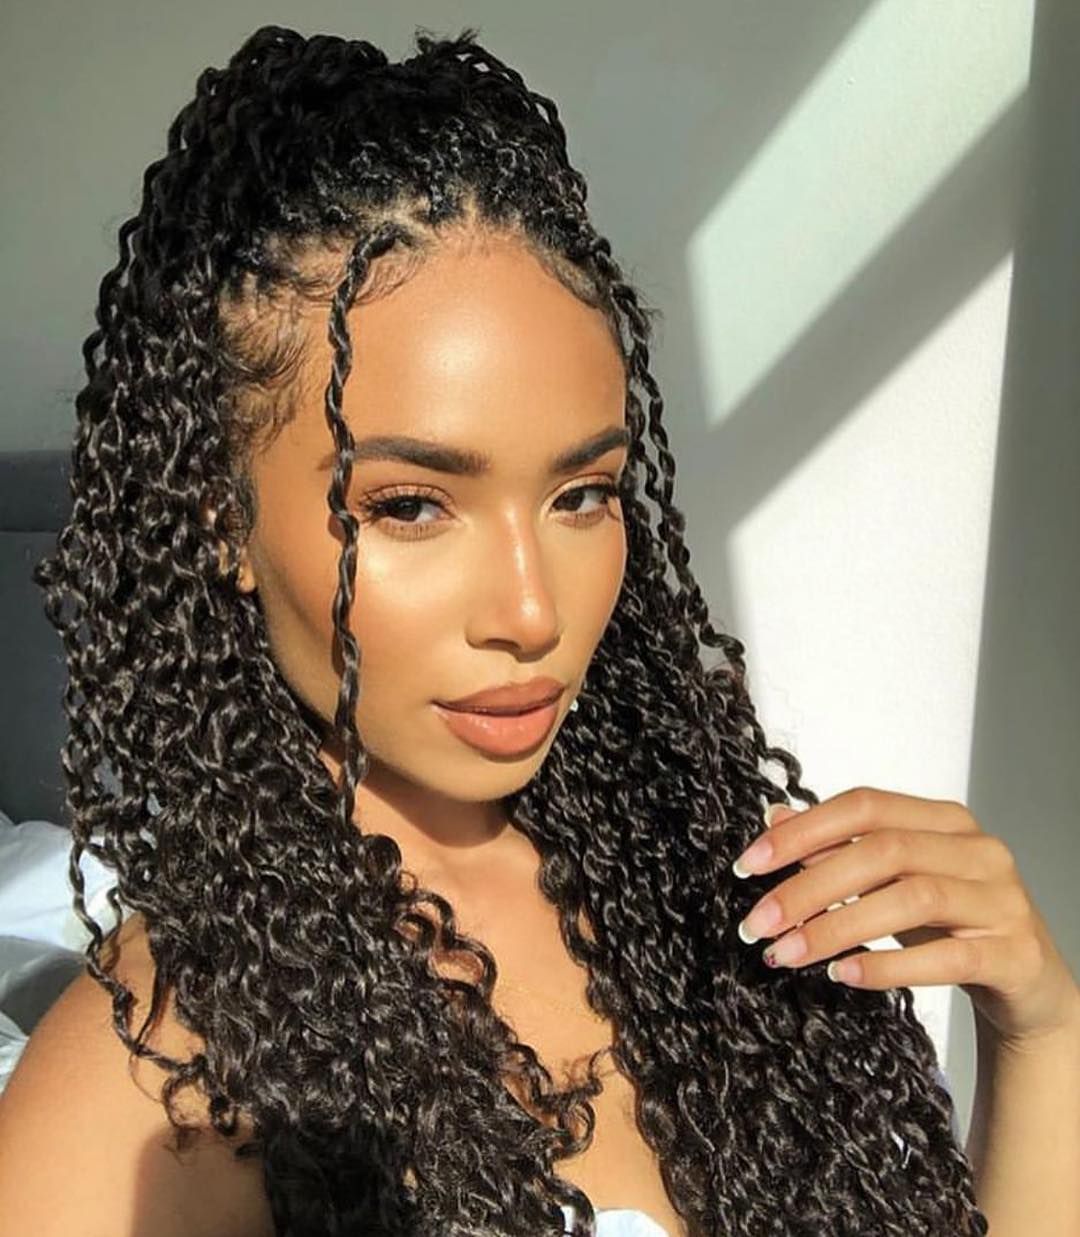 Passion Twist Passion Twist Hair Natural Black Water Wave Bohemian Braids Hairstyles Trends Network Explore Discover The Best And The Most Trending Hairstyles And Haircut Around The World